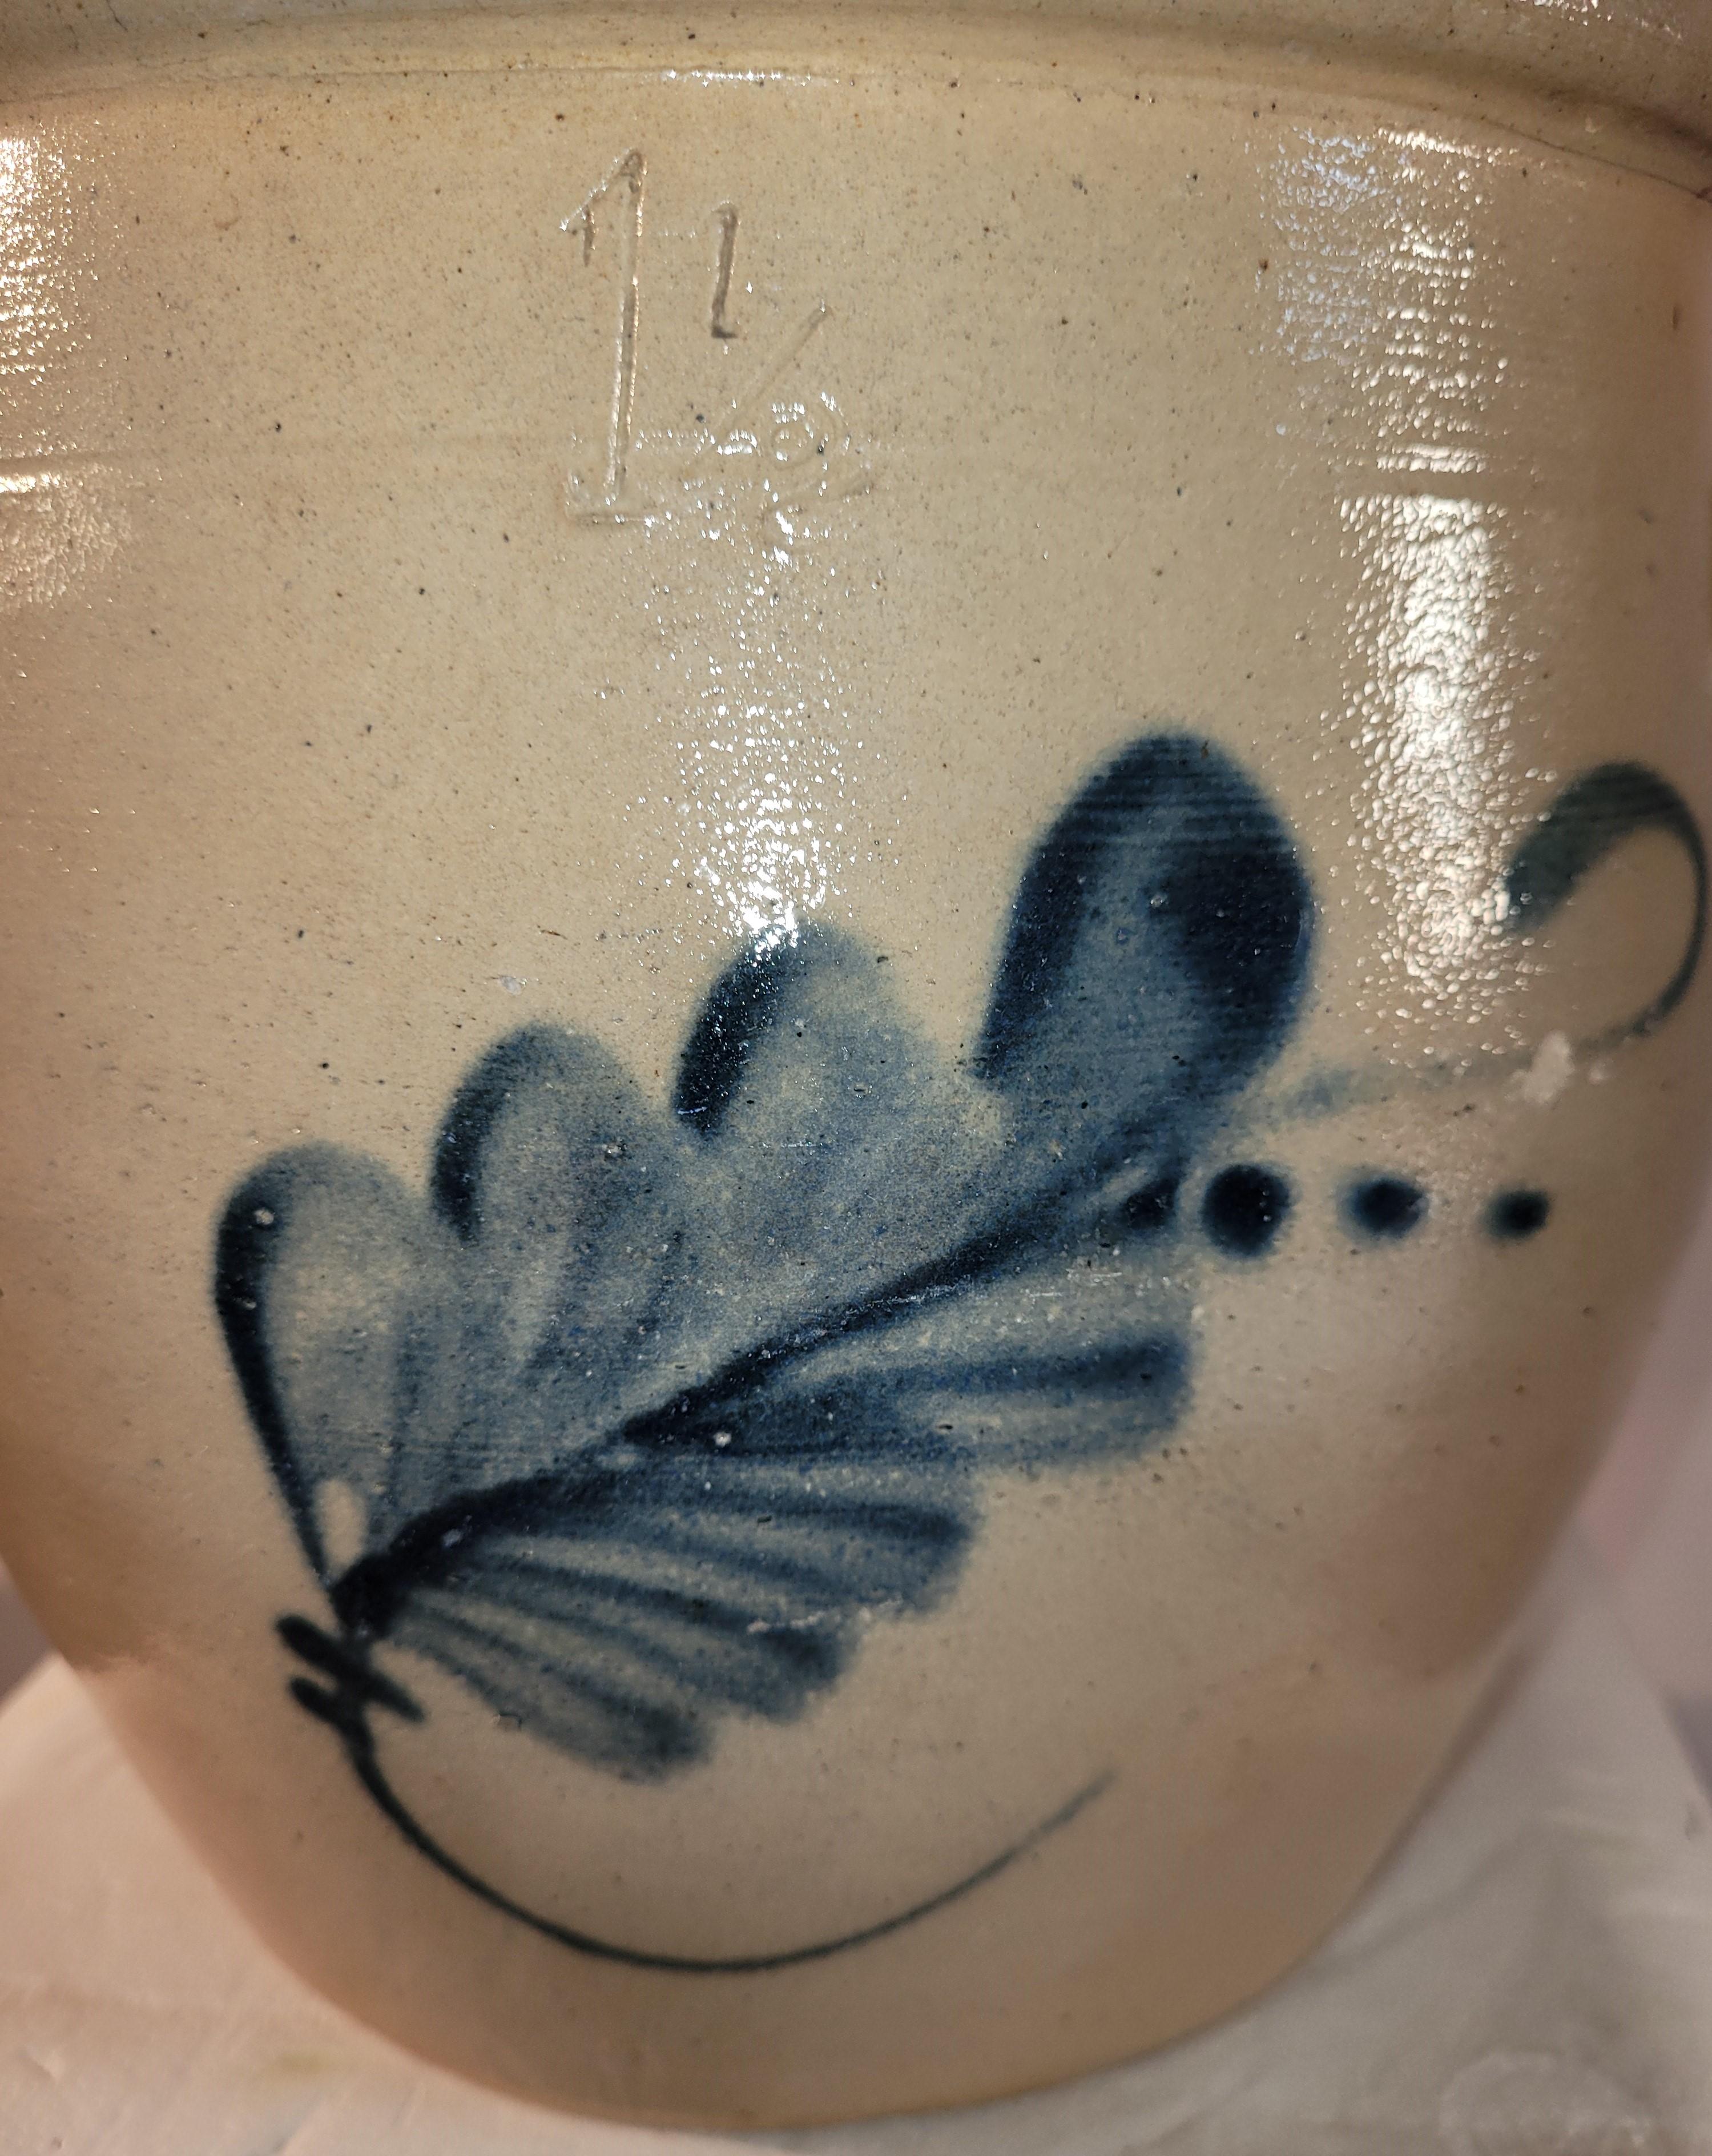 19th C decorated stoneware crock with floral motif. 1 1/2 gallon crock.